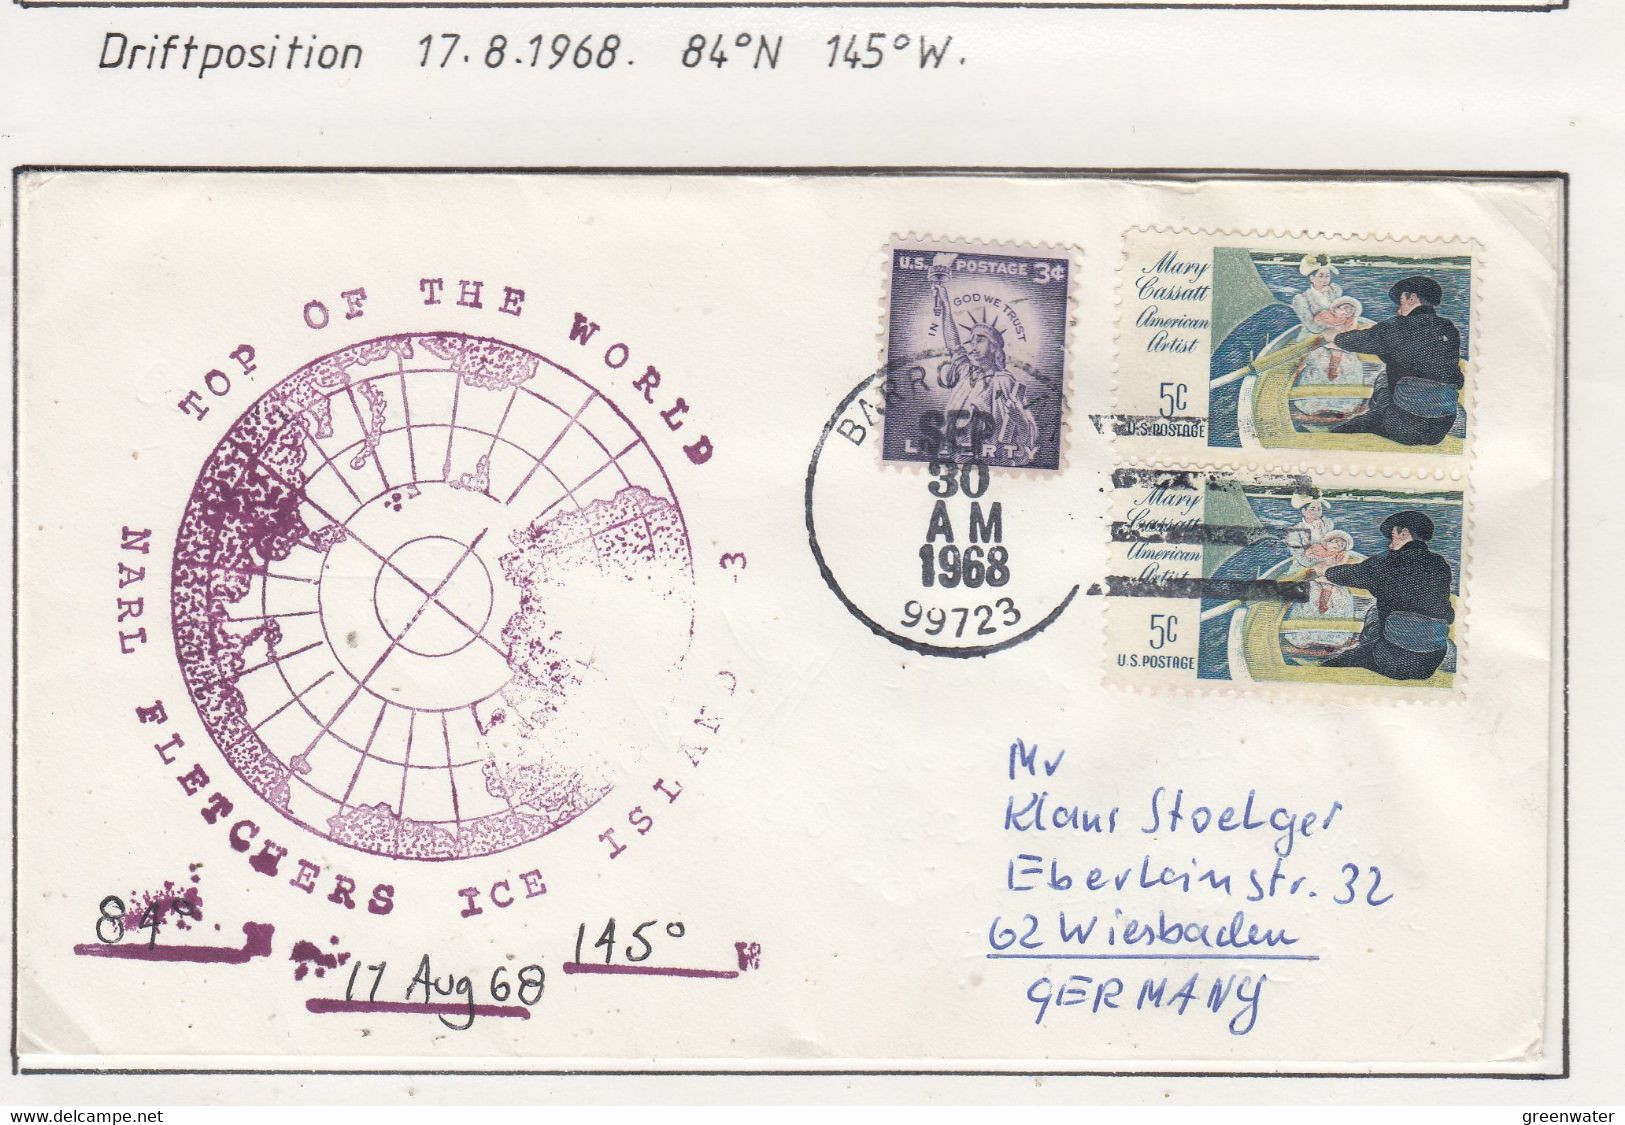 USA Driftstation ICE-ISLAND T-3 Cover Ca Fletcher's Ice Island T-3 Periode 4 Ca  SEP 30 1968 (DR127C) - Stations Scientifiques & Stations Dérivantes Arctiques